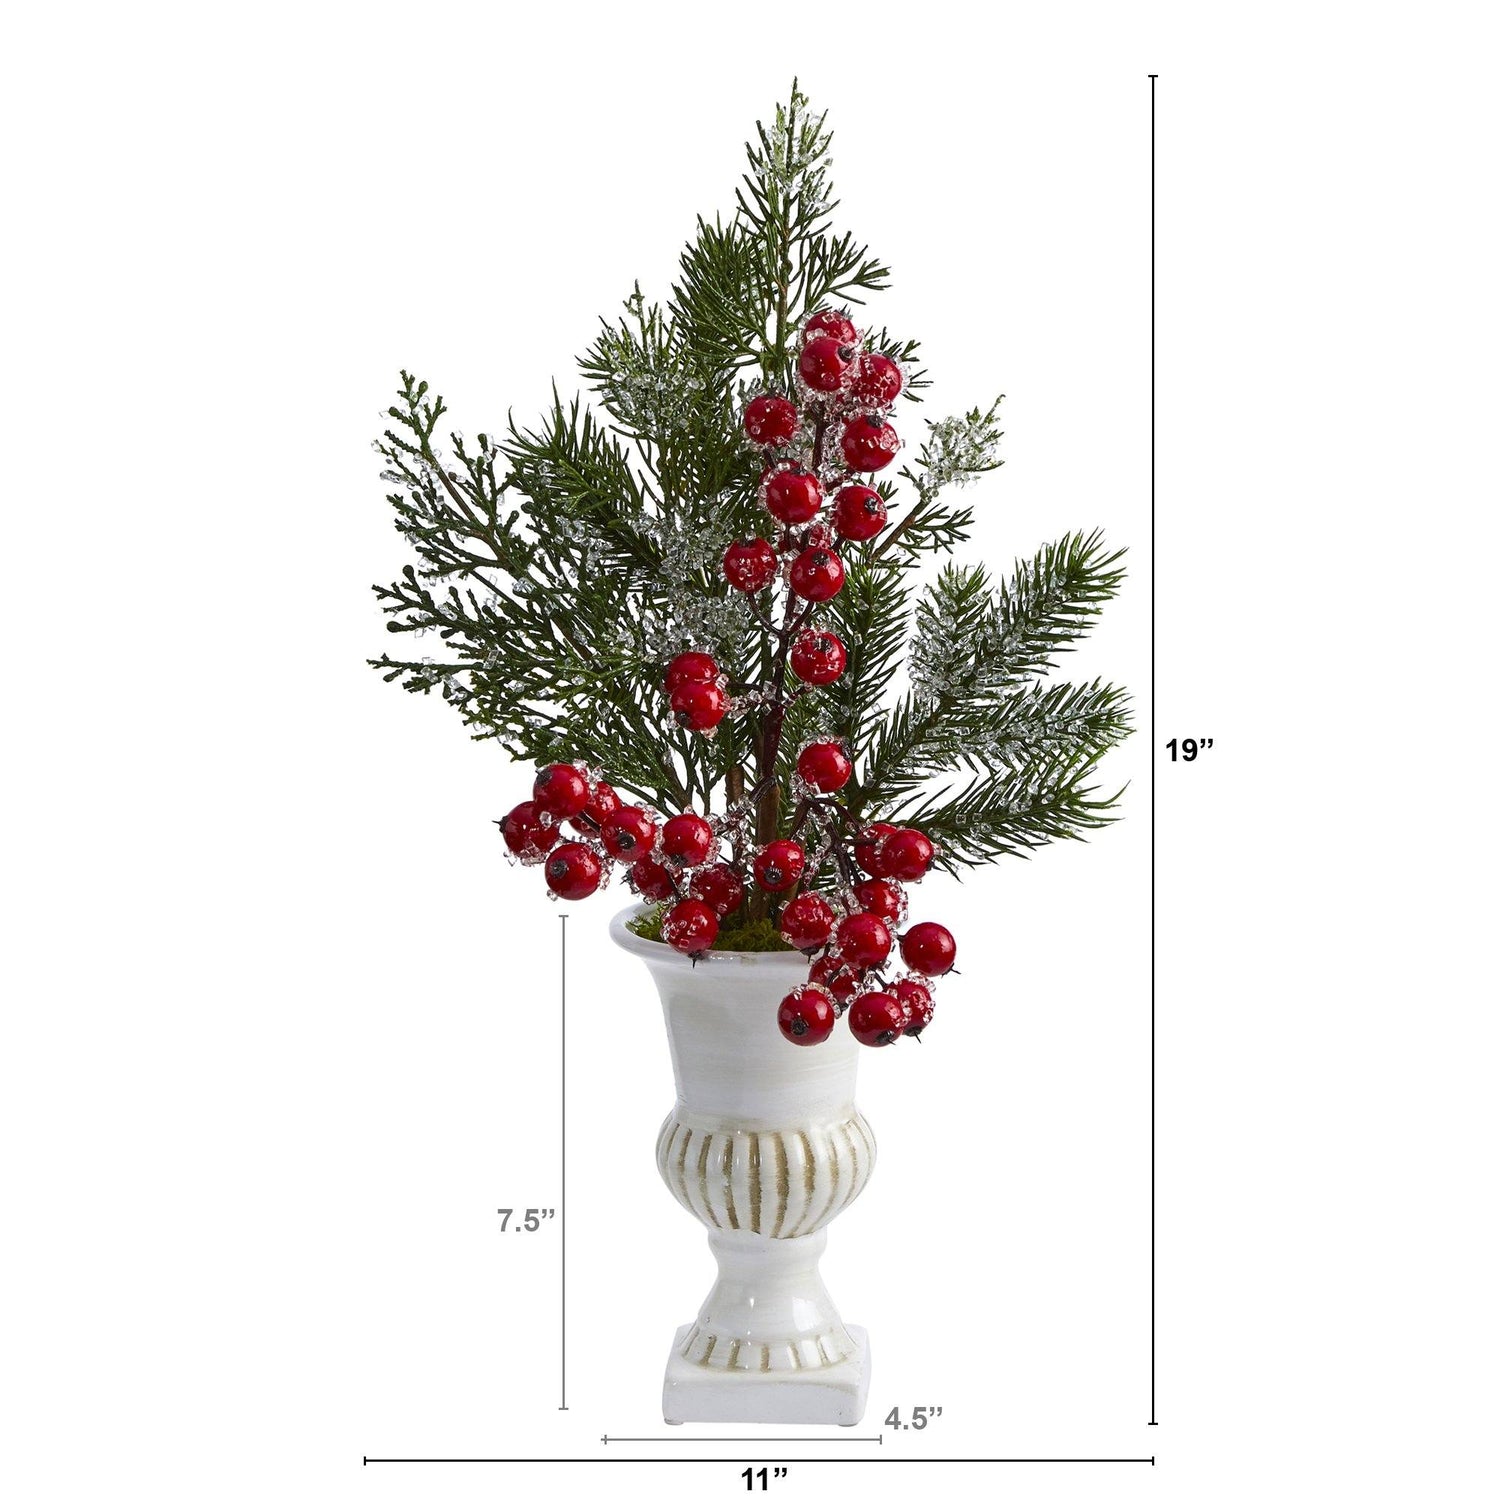 19” Iced Pine and Berries Artificial Arrangement in White Urn